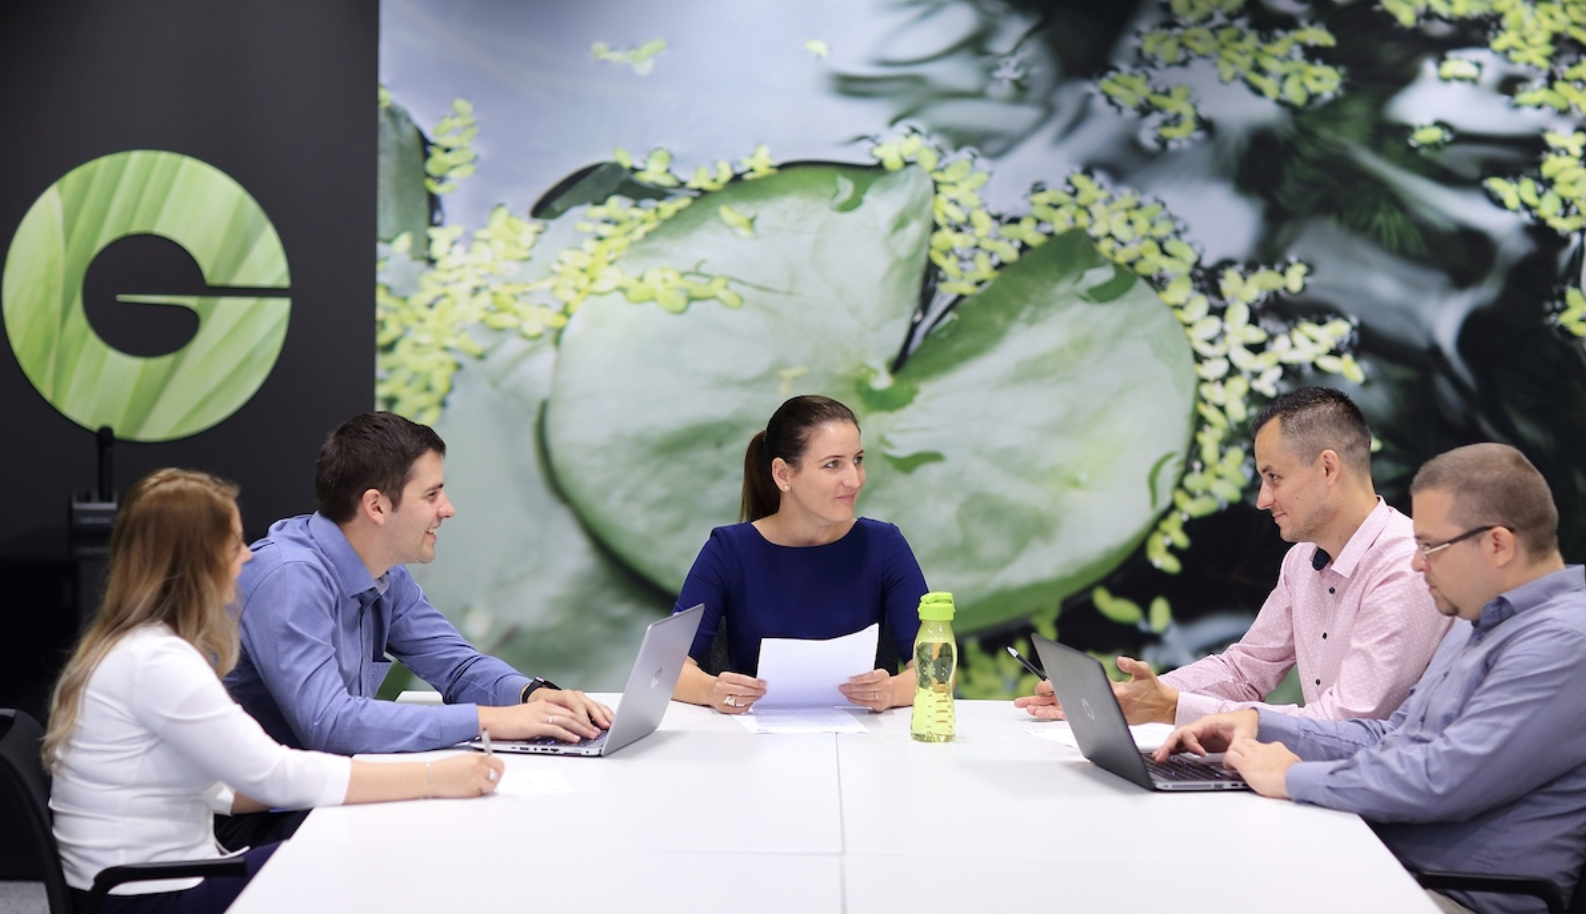 Givaudan Innovation Team collaborates with Sustainable Food startups from MassCHallenge